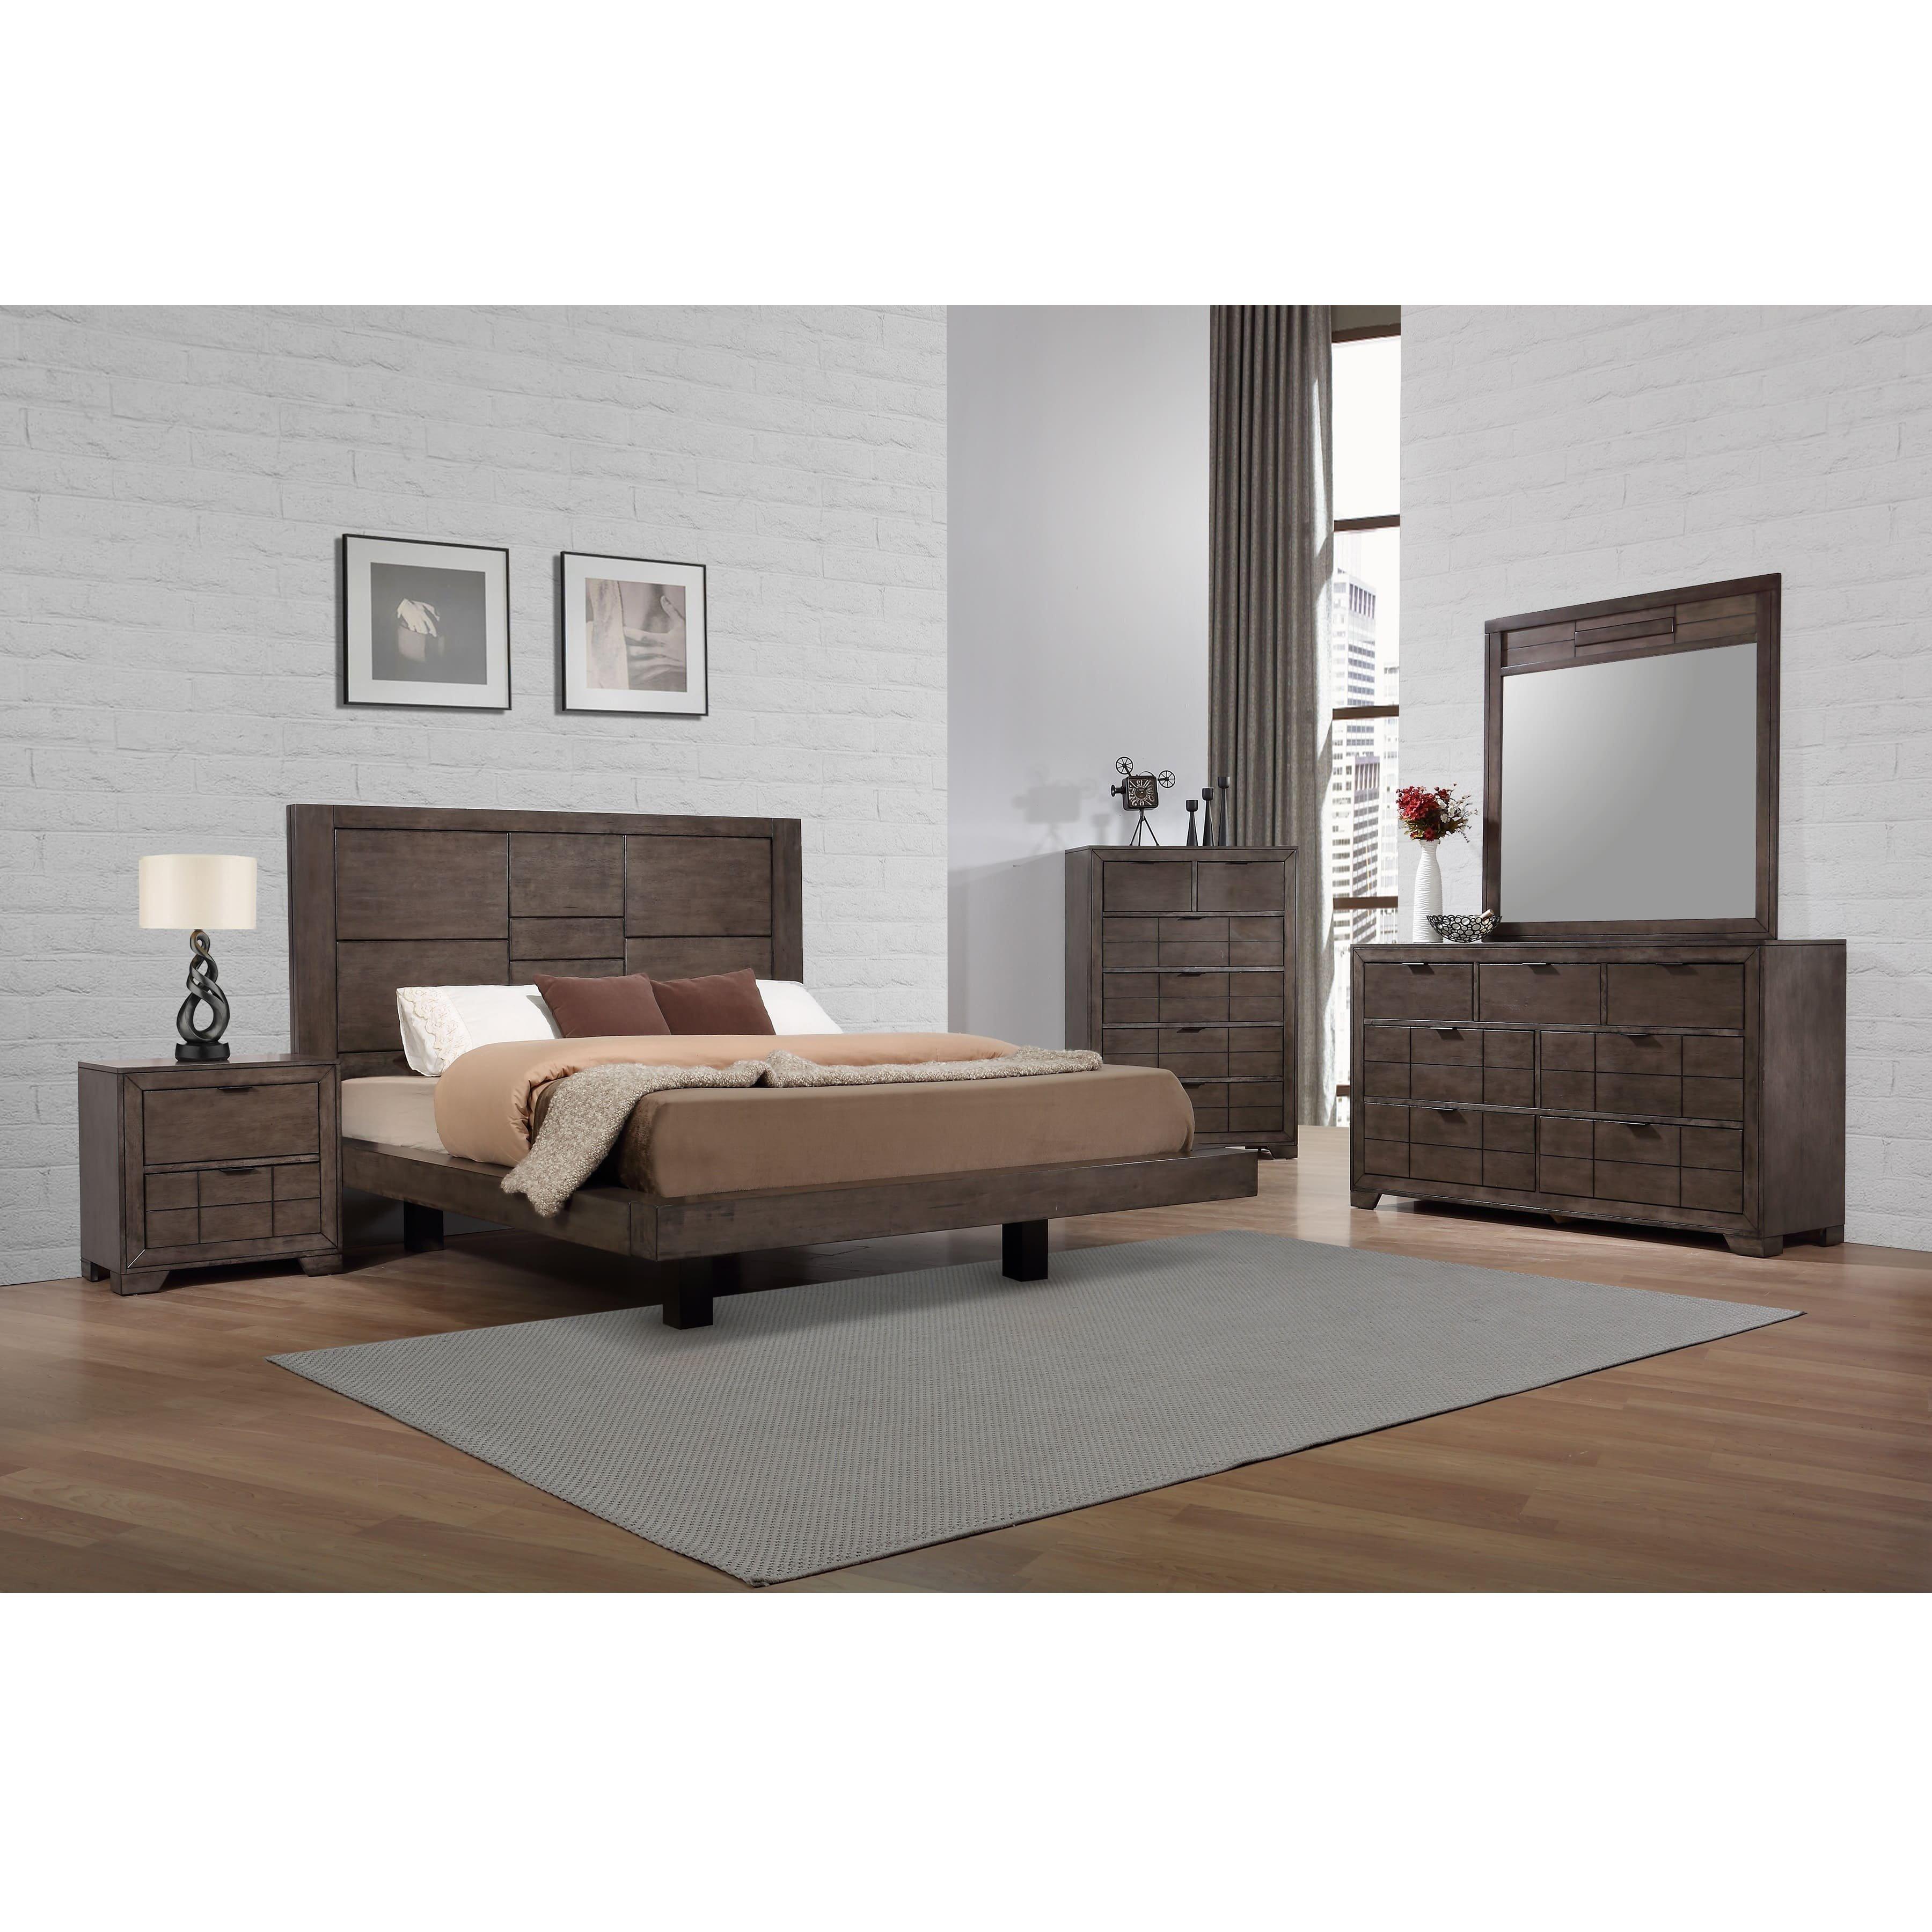 Rent To Own Elements International 7 Piece Logic King Bedroom Collection At Aaron S Today